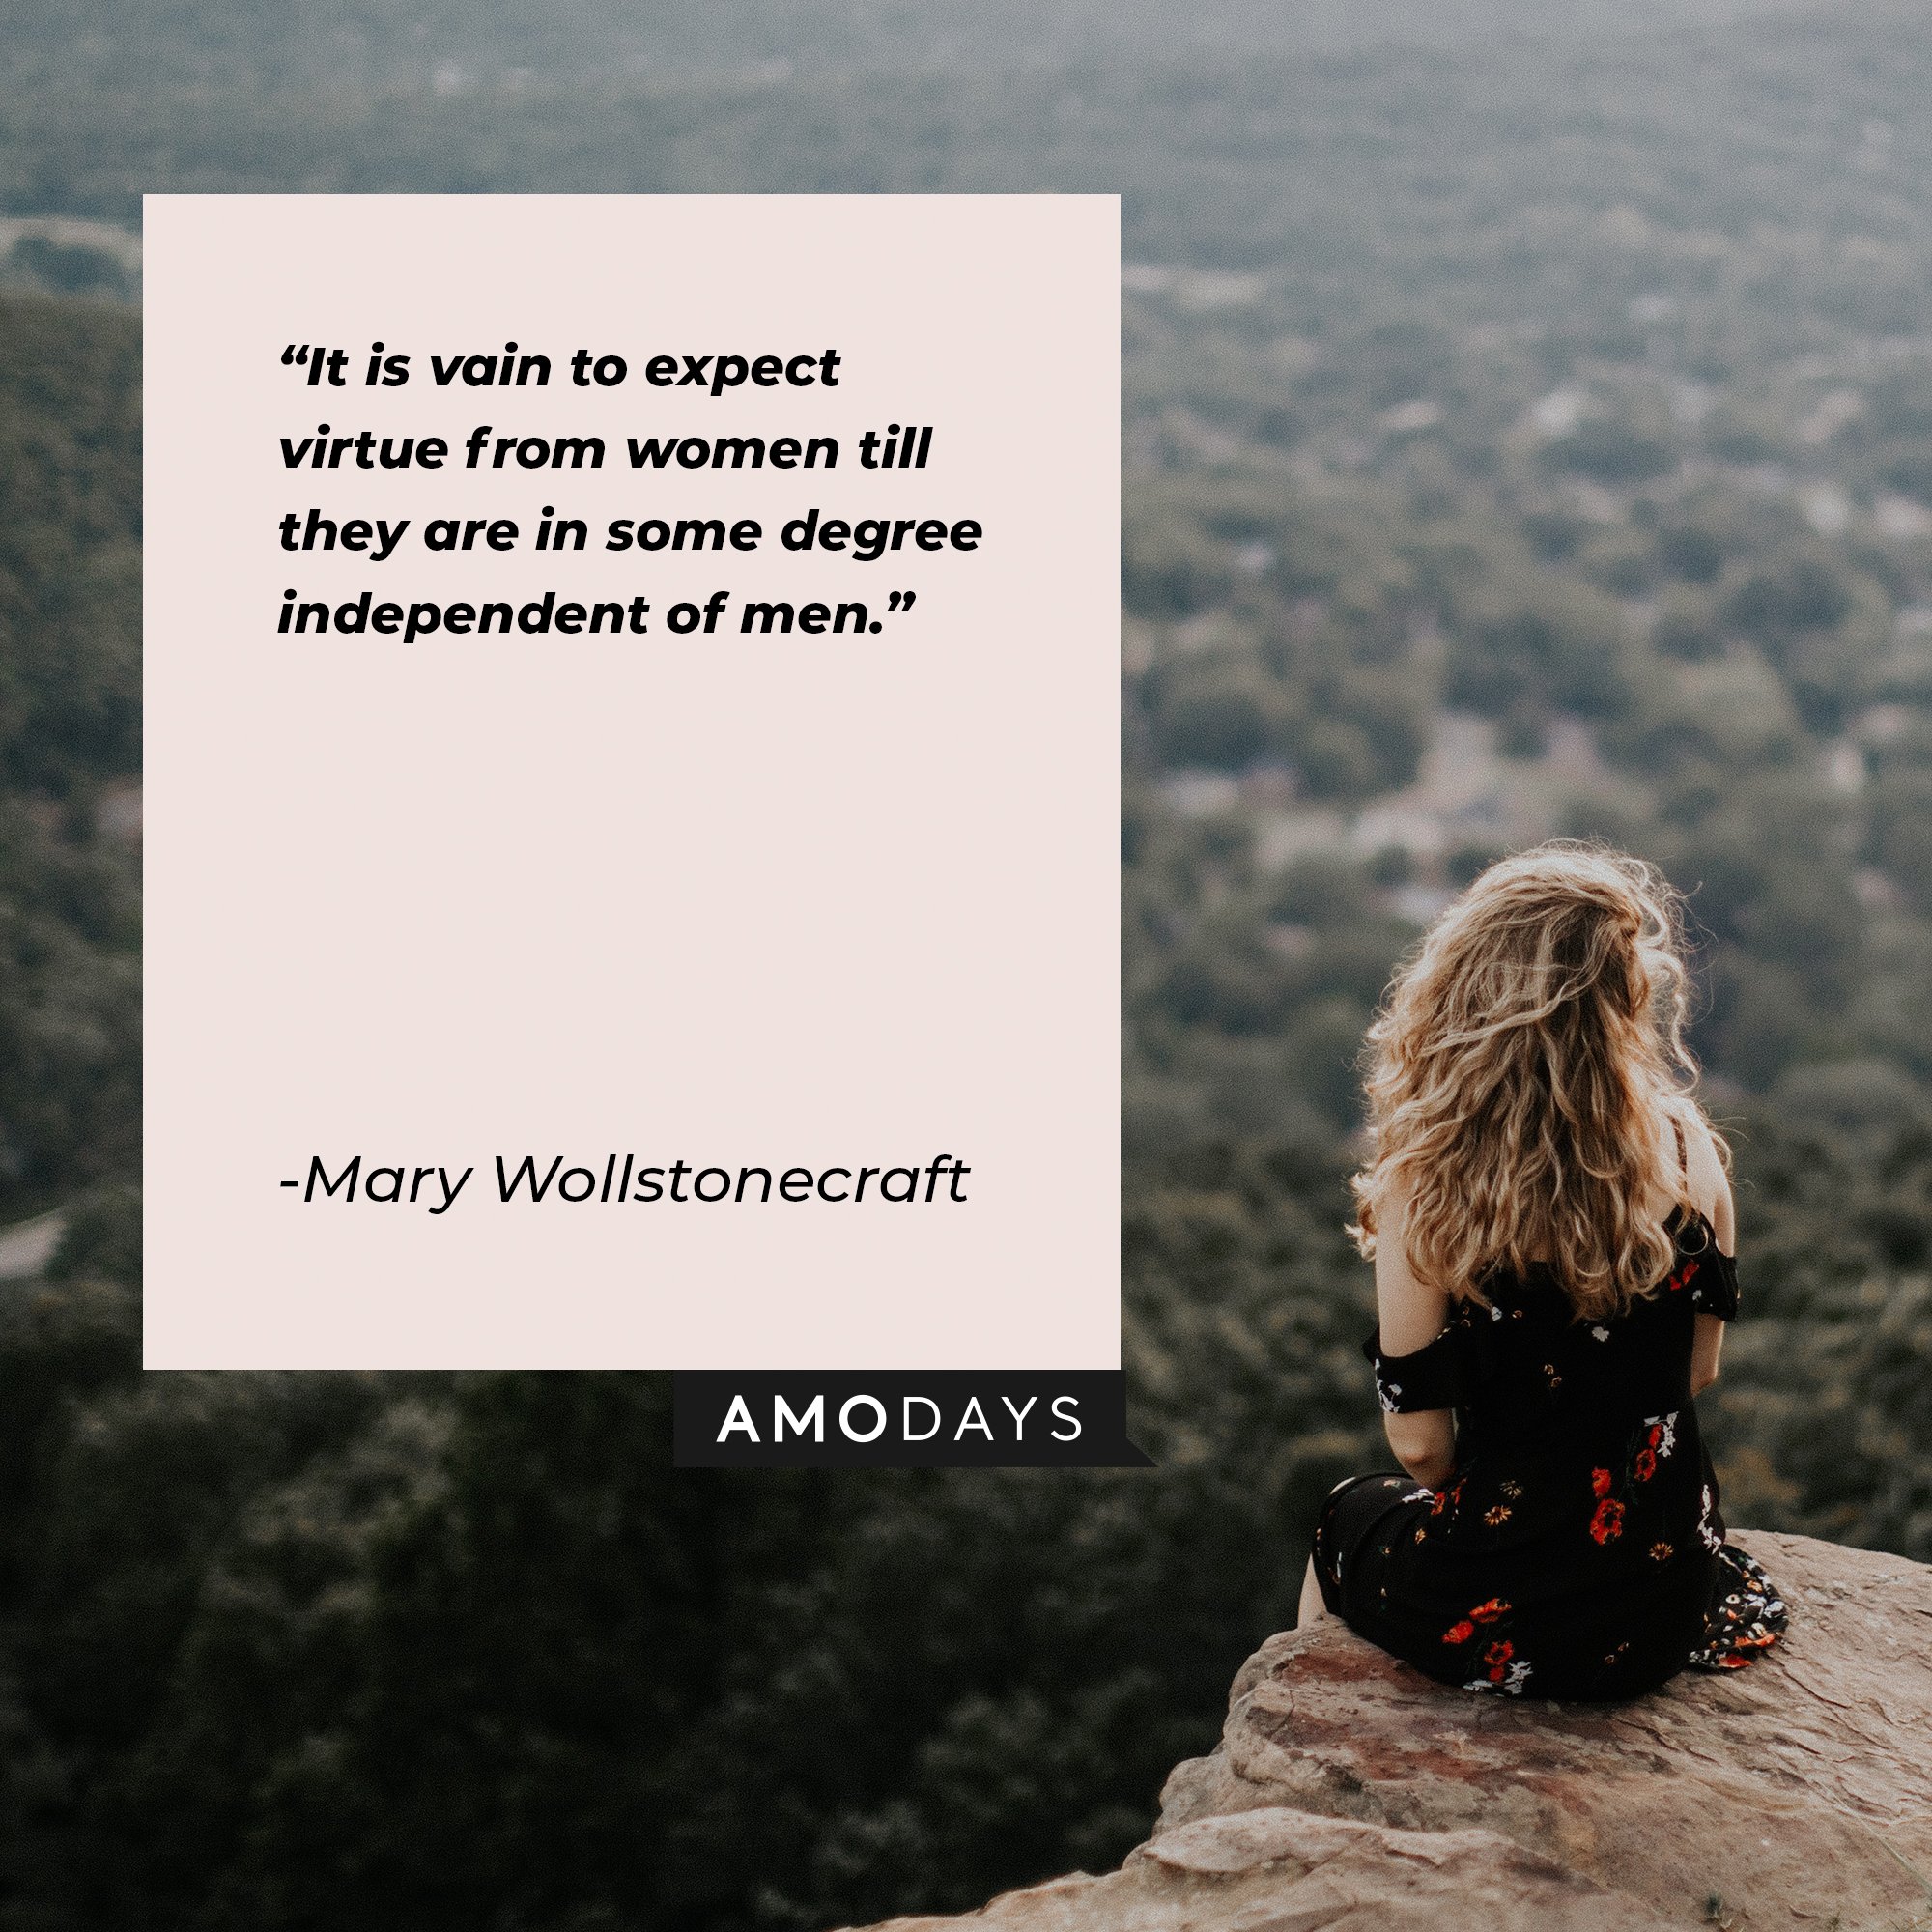 Mary Wollstonecraft’s quote: "It is vain to expect virtue from women till they are in some degree independent of men." | Image: AmoDays  